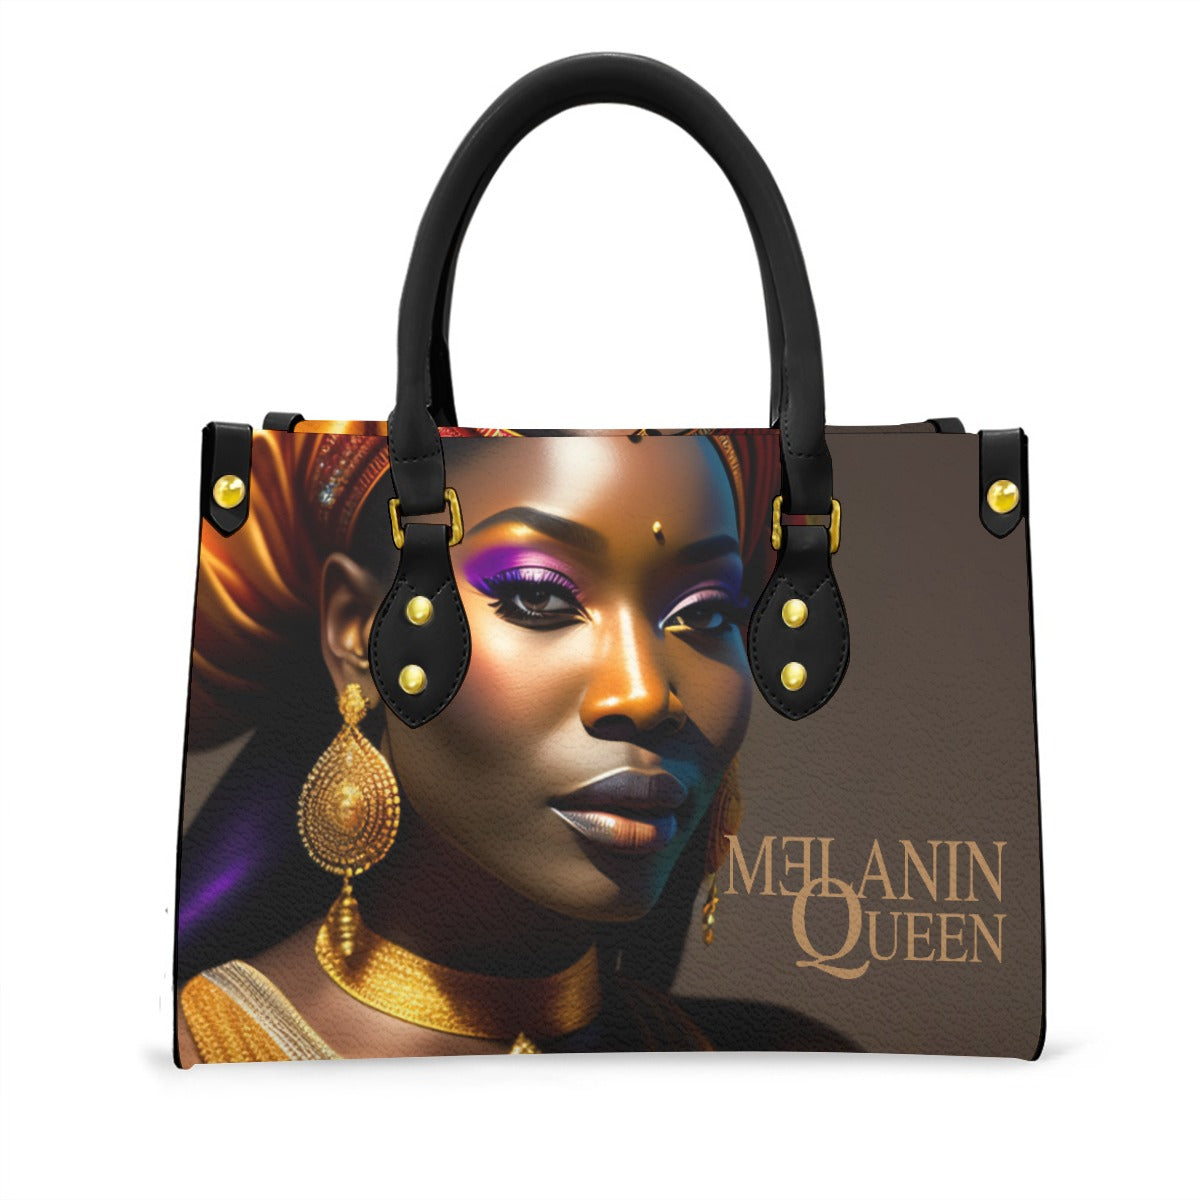 Queen To Be by Melanin Goddess - Women's Tote Bag With Black Handle